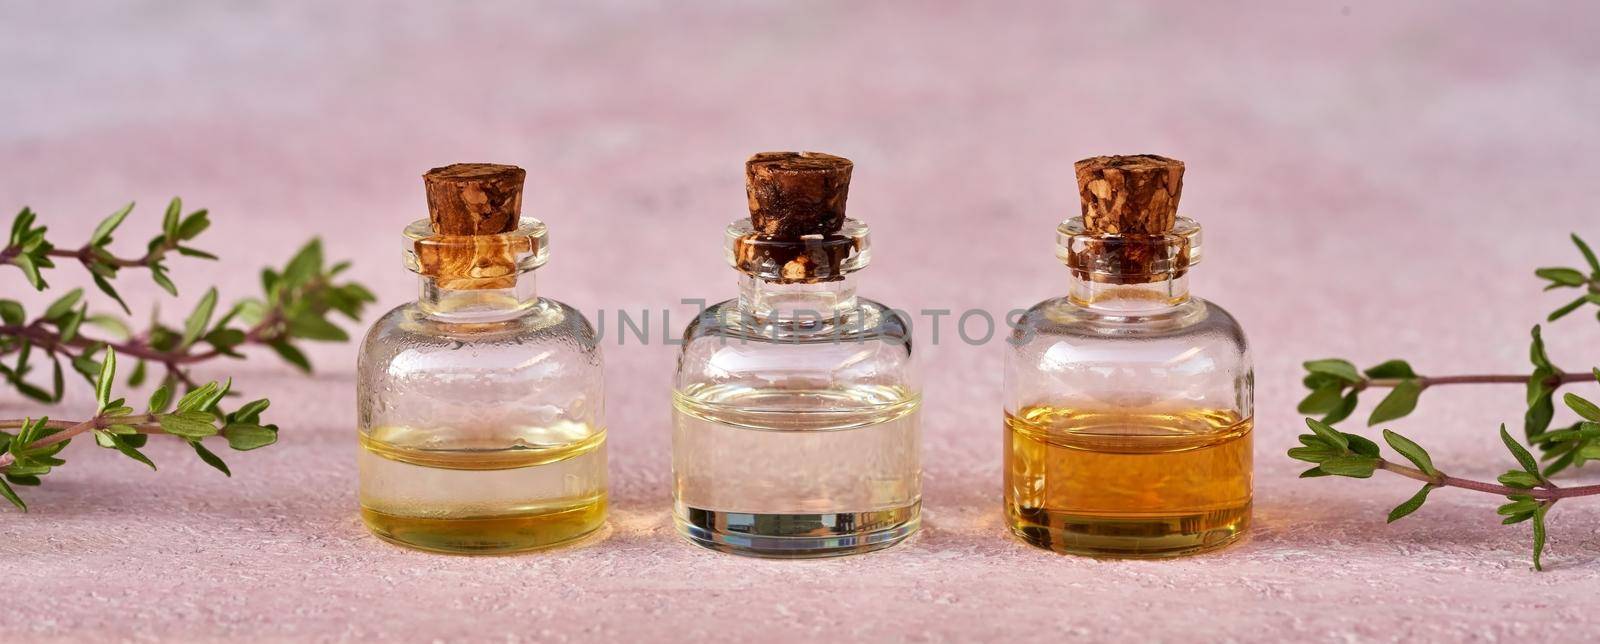 Essential oil bottles with fresh thyme twigs on pastel pink background by madeleine_steinbach